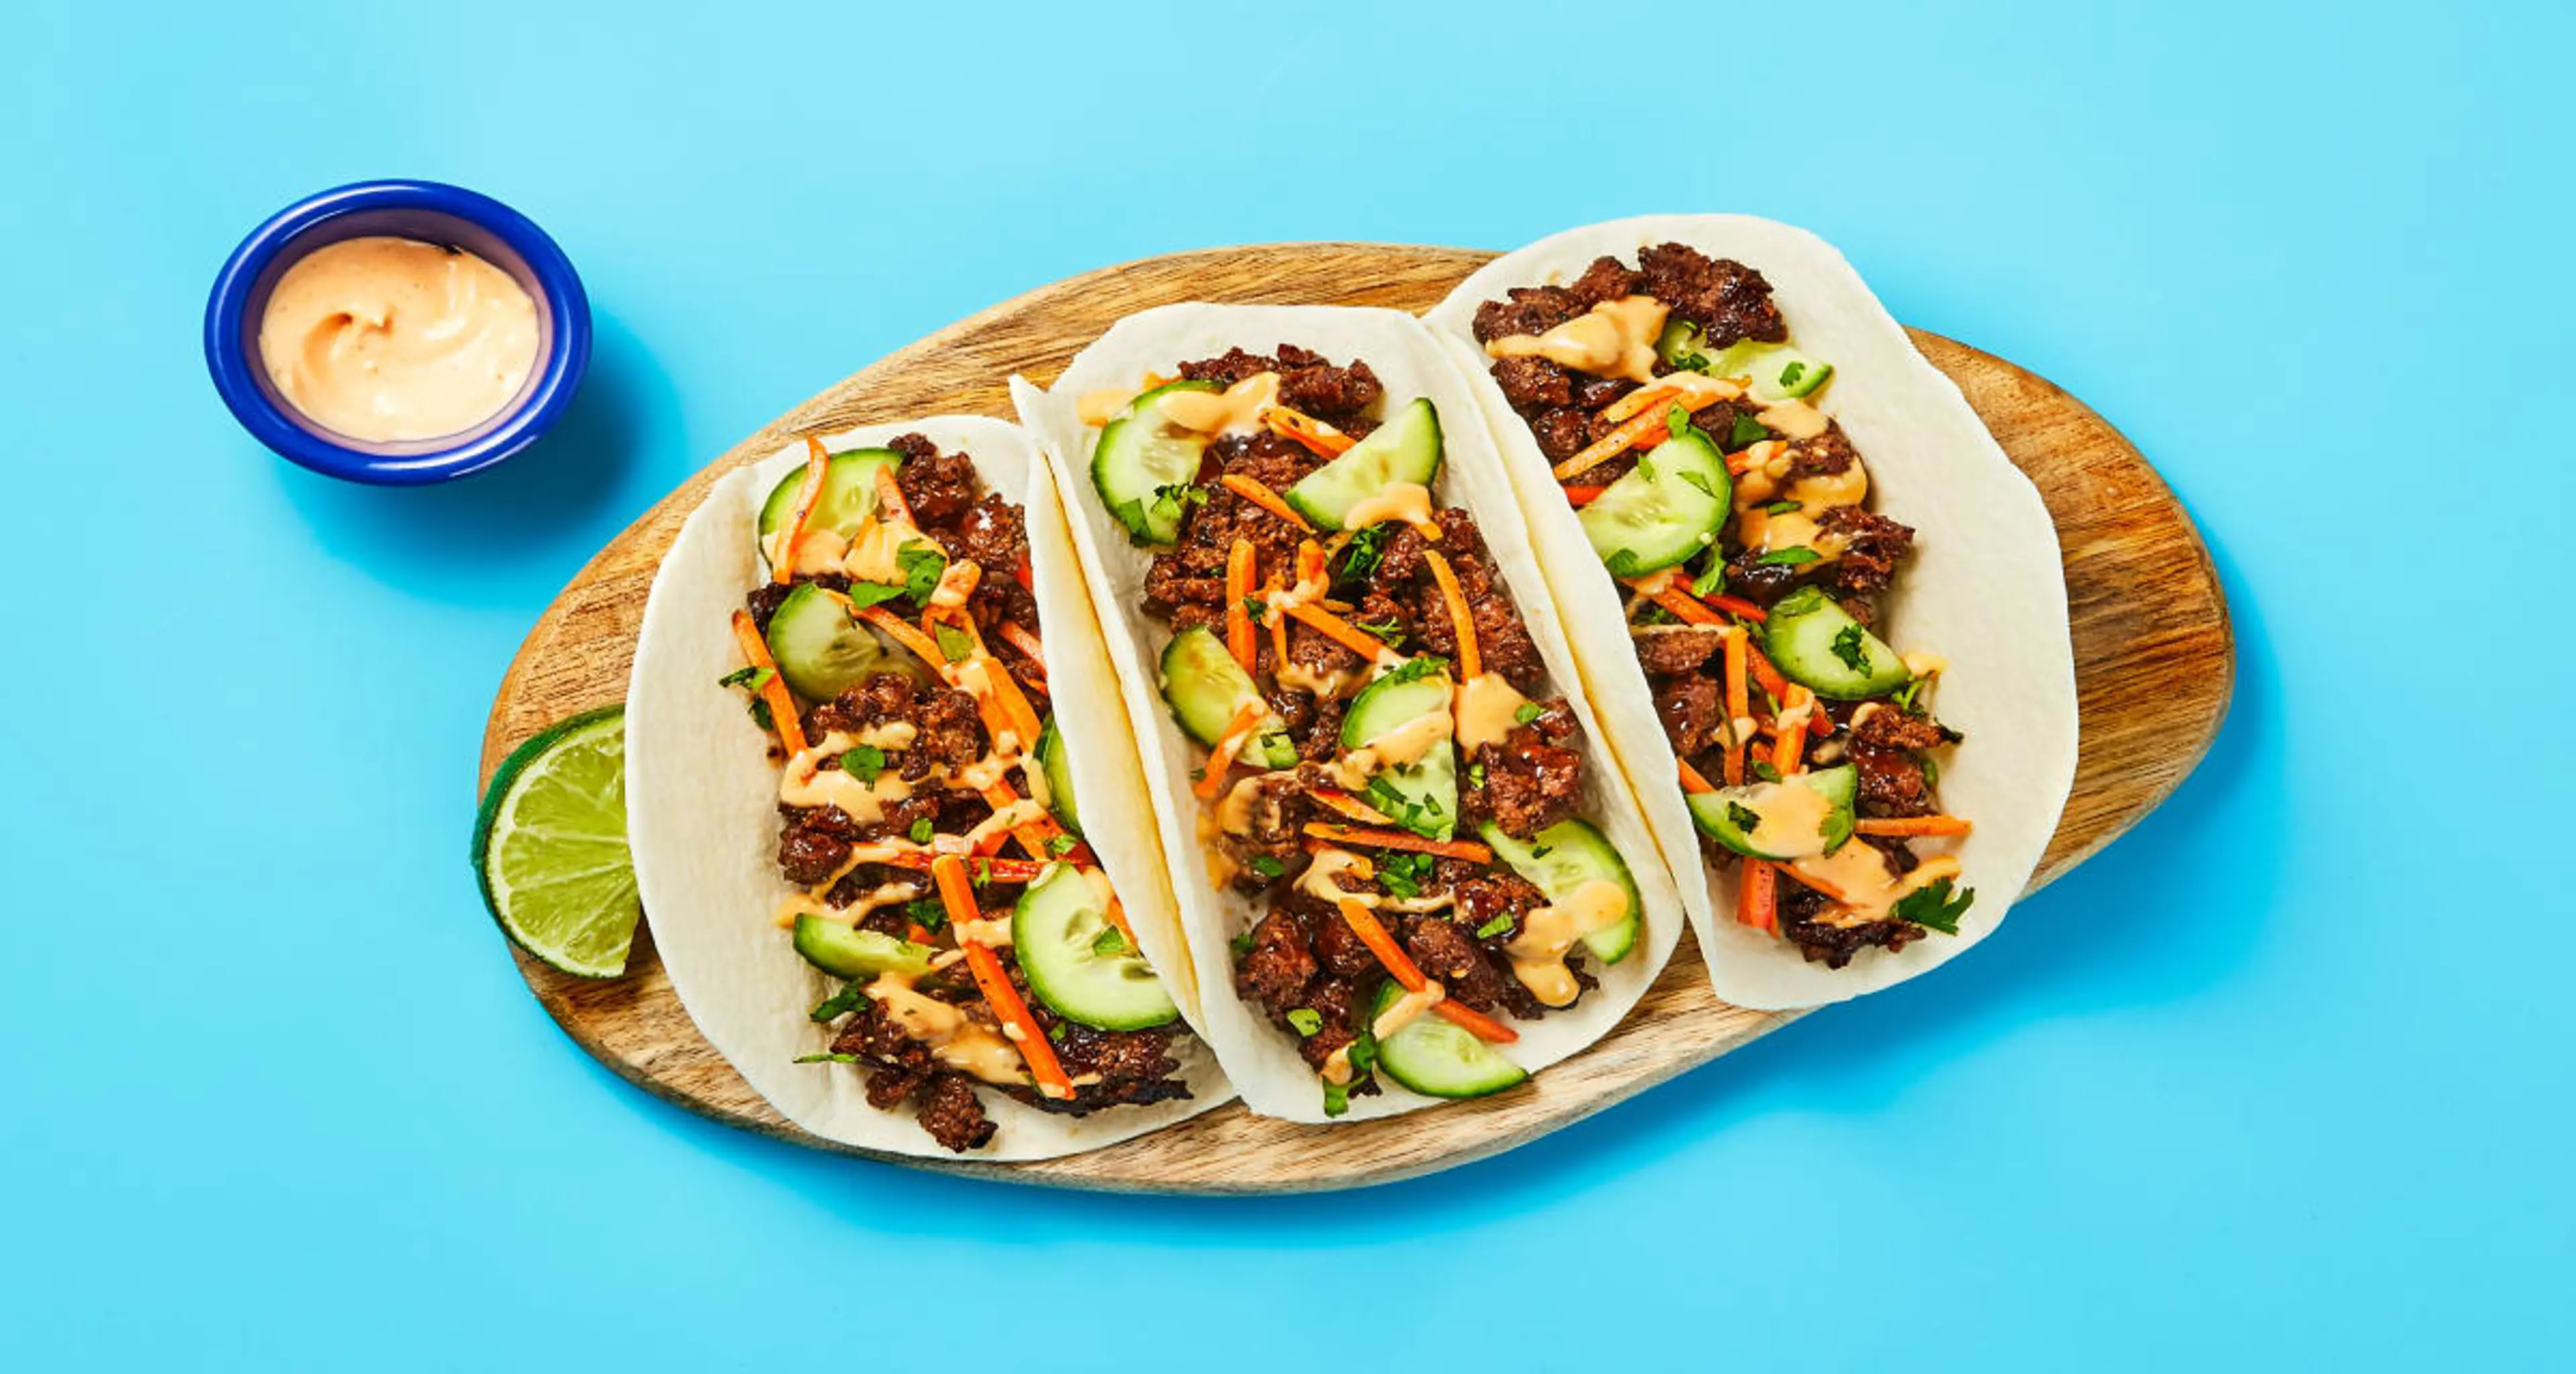 Banh-Mi-Style Beef Tacos with Pickled Cucumber & Sriracha Ma